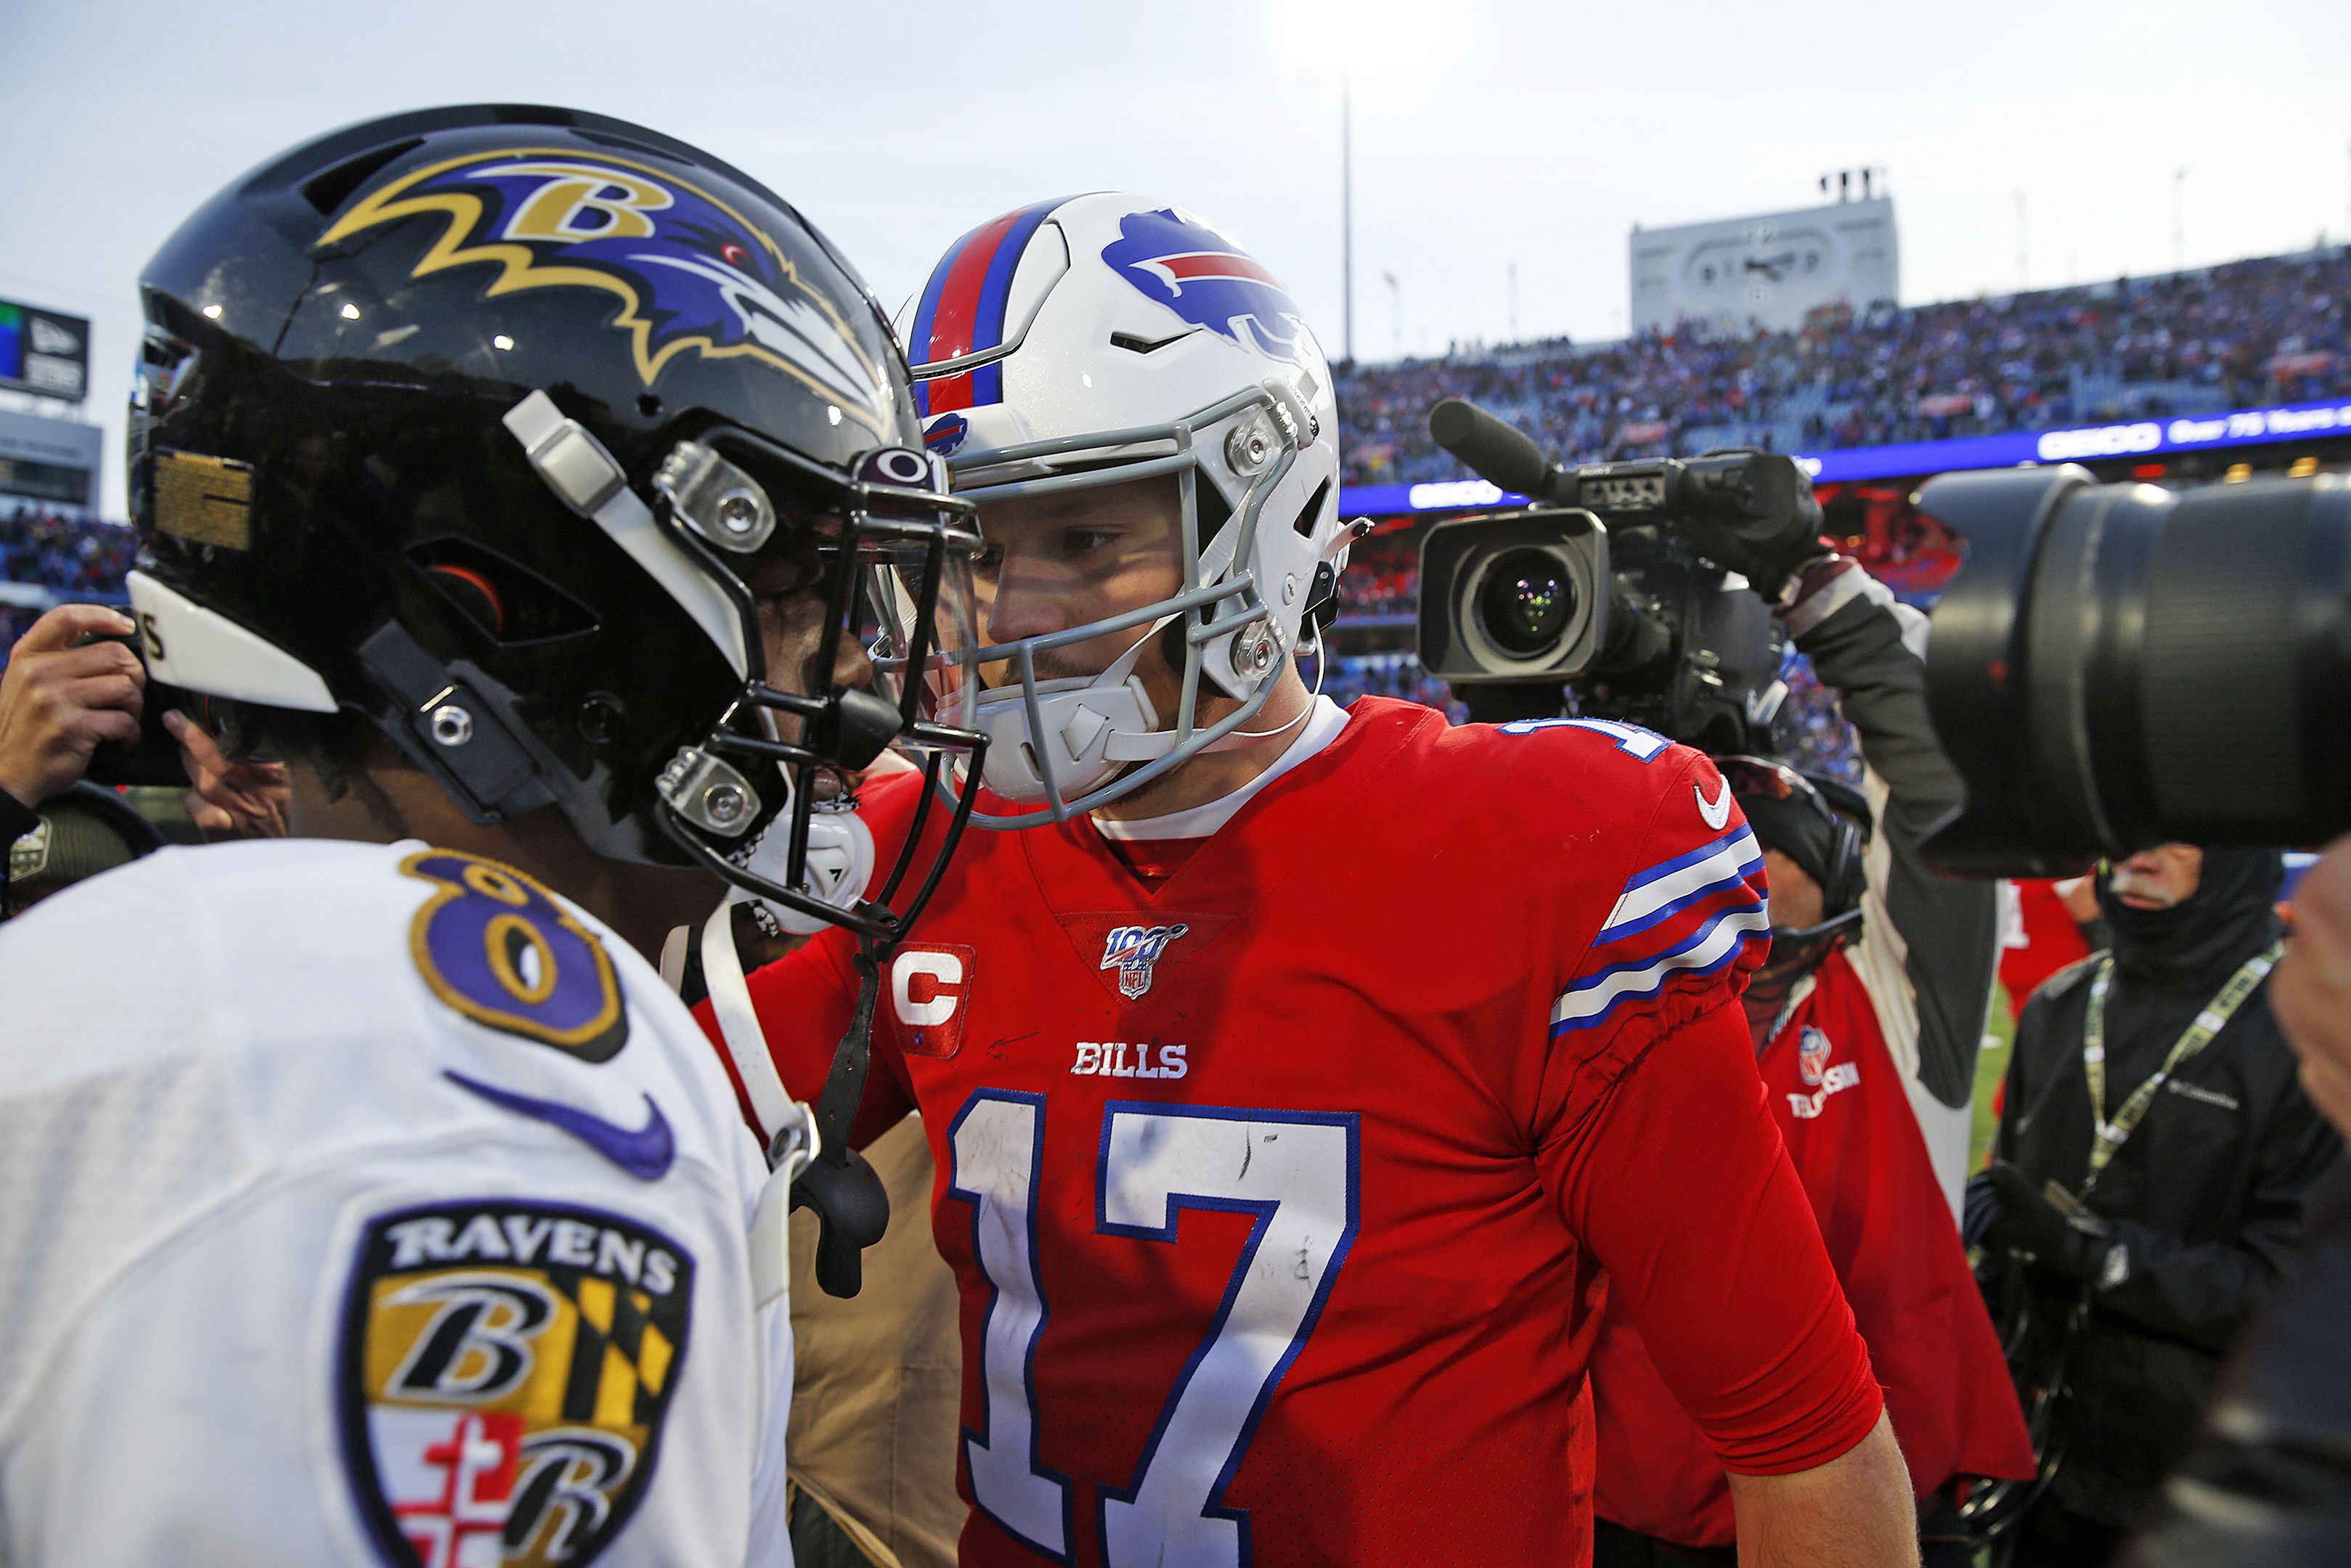 Ravens Set to Face Bills in Divisional Playoffs